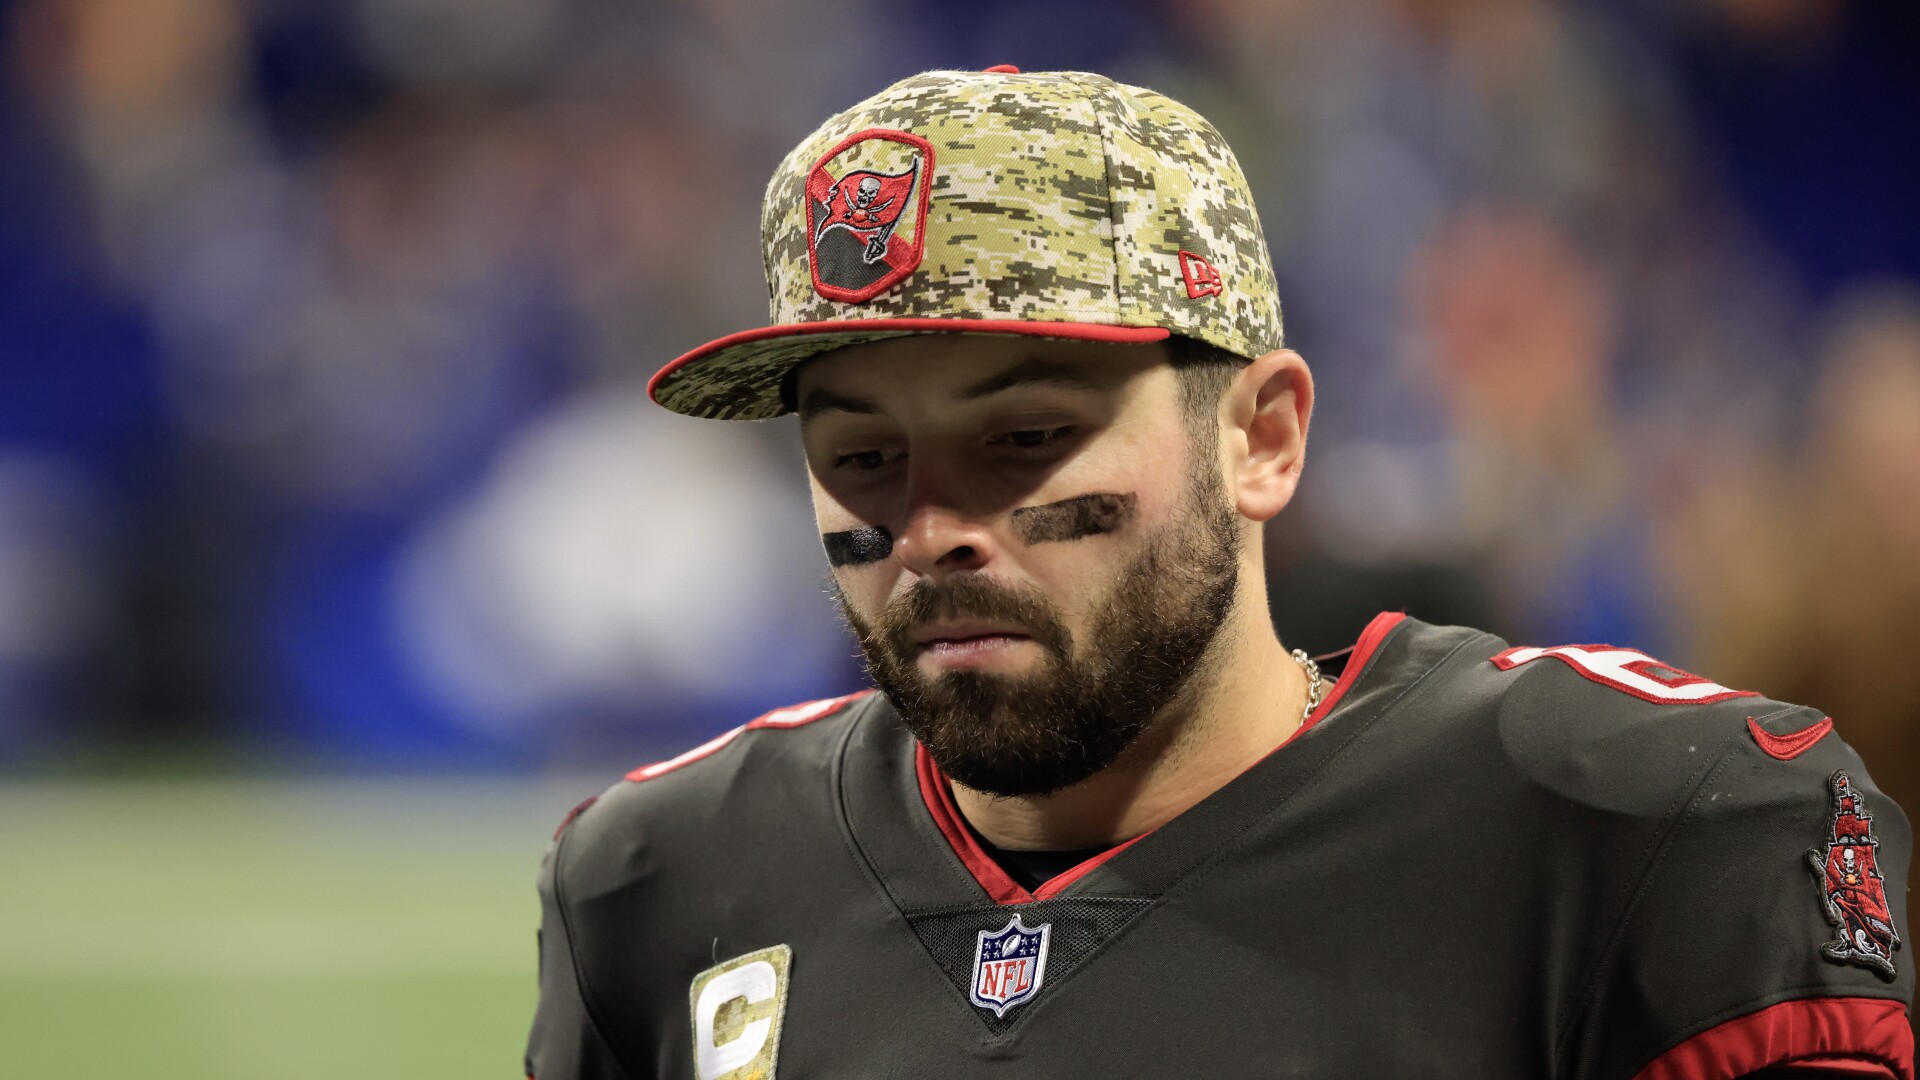 baker mayfield: until everybody gets pissed off enough to get it fixed, there will be no change